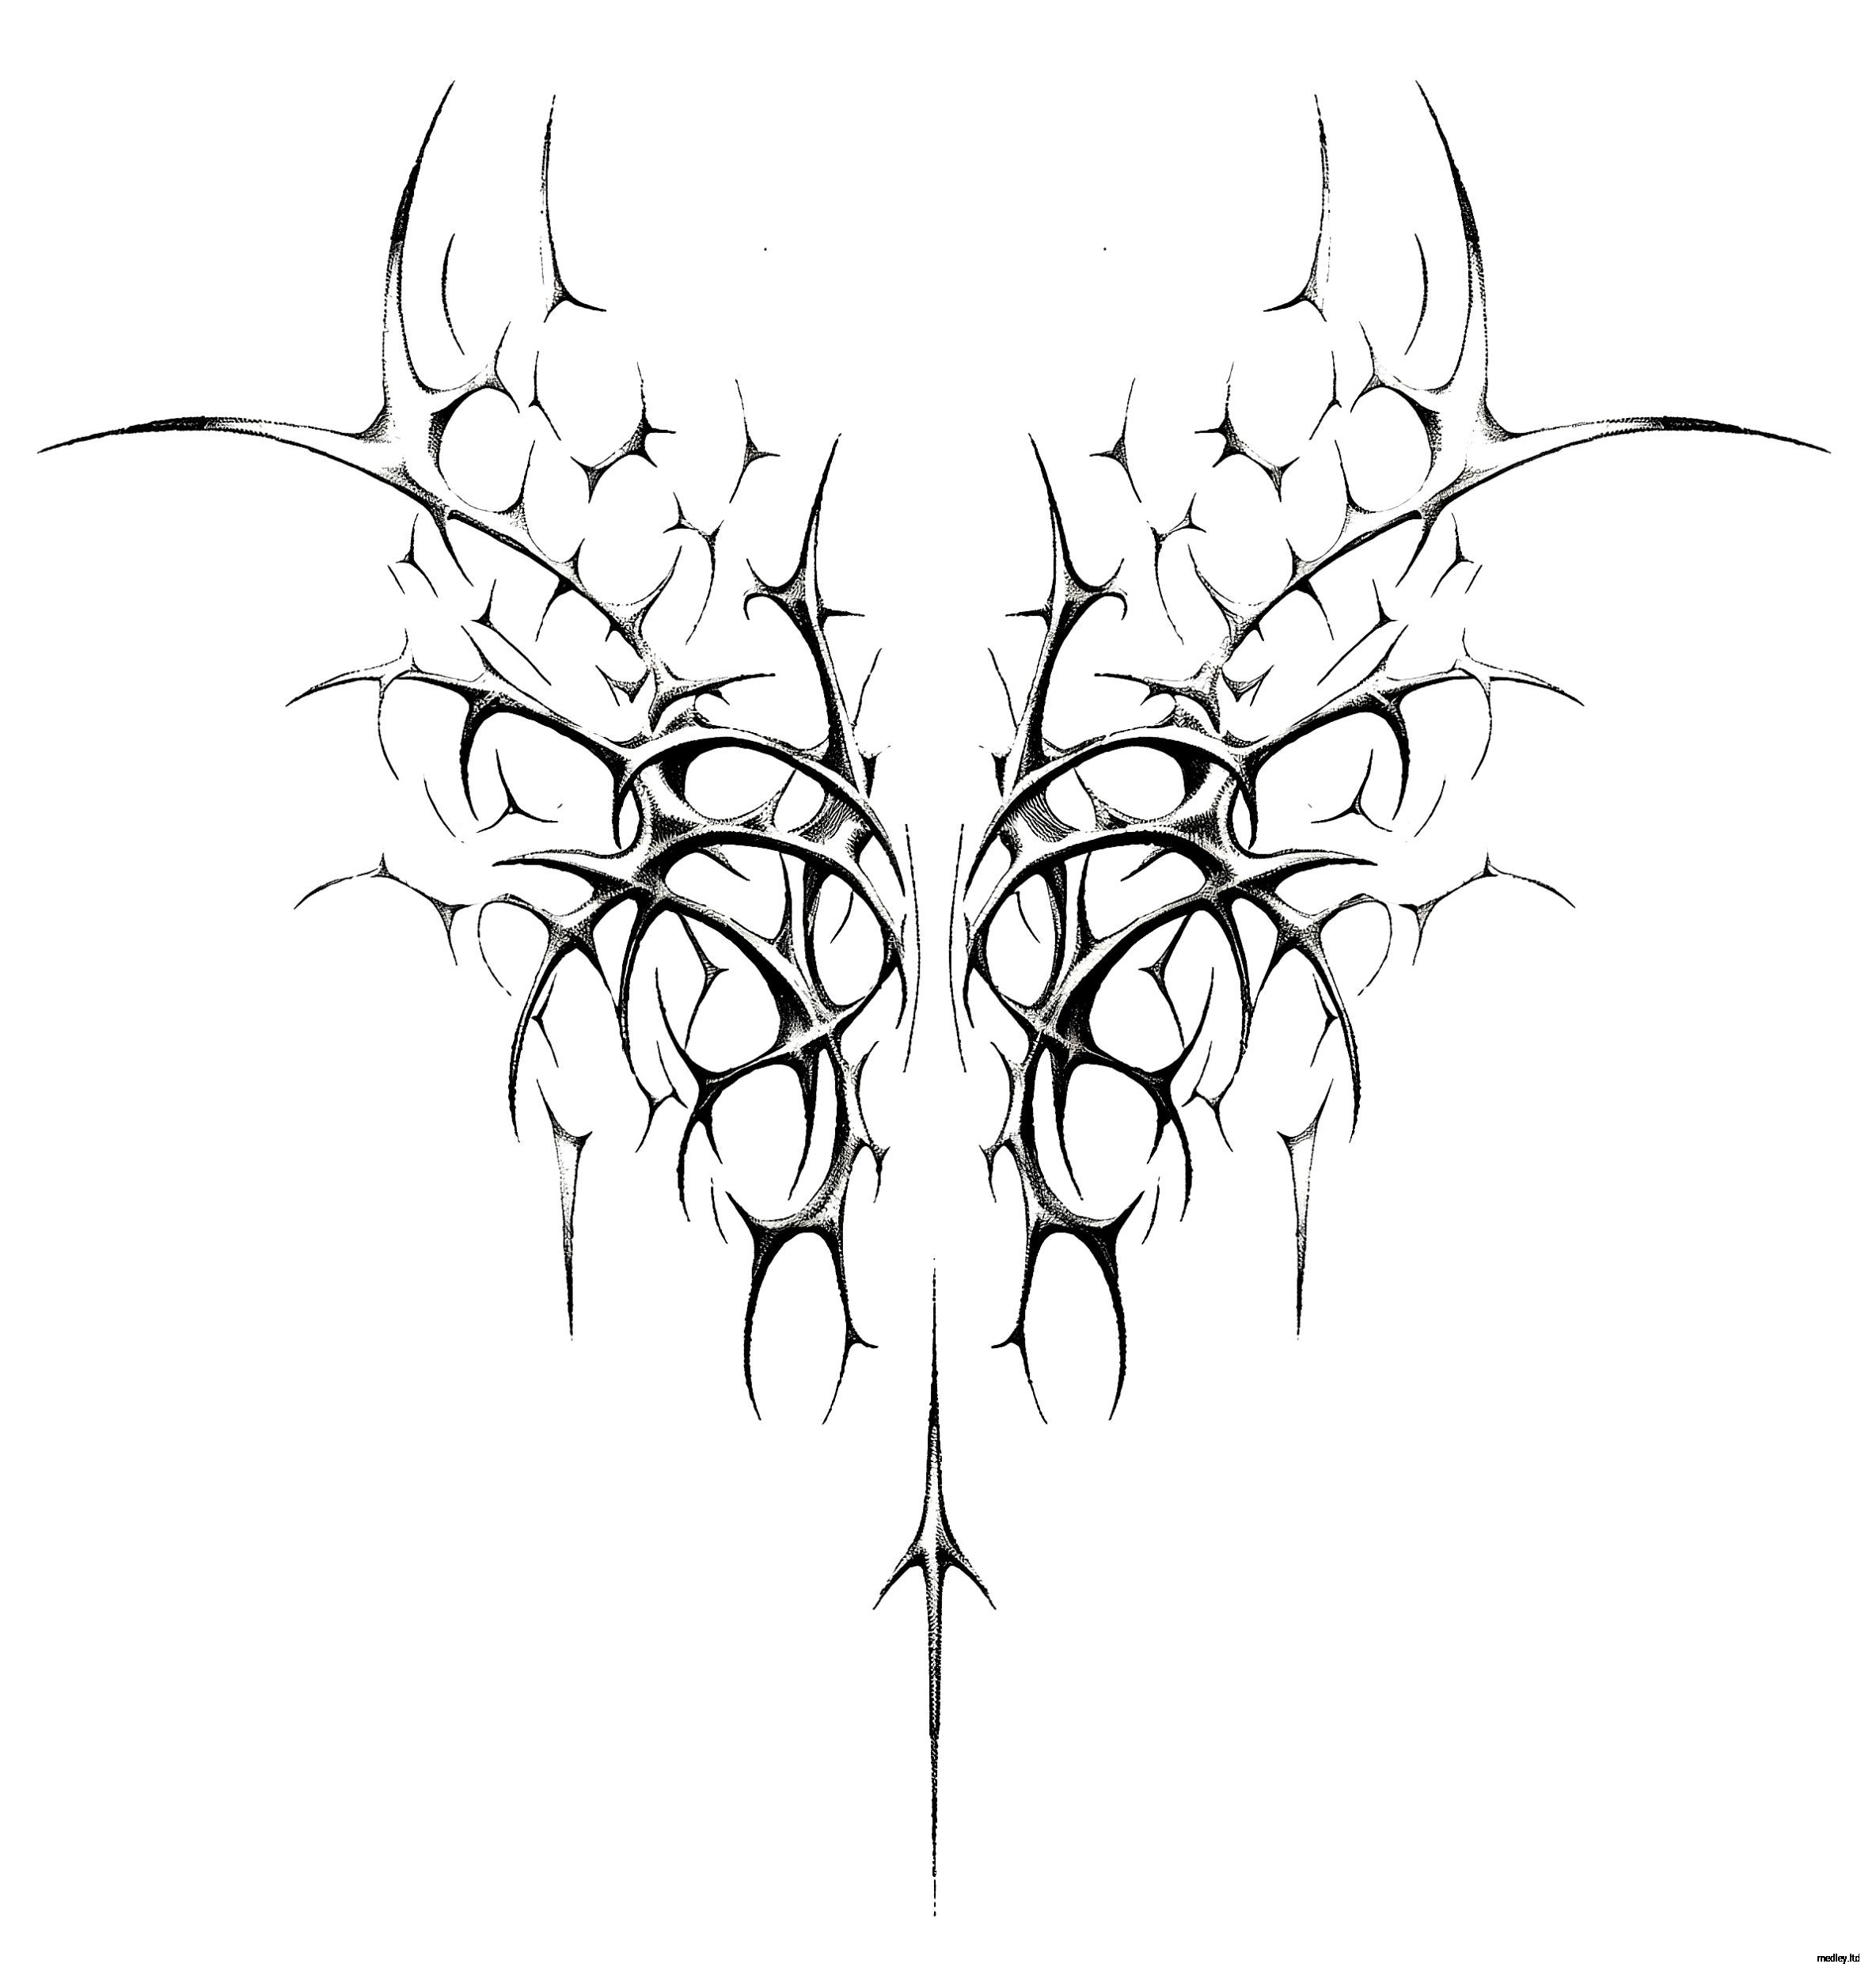 Cyber Sigilism Wings II tattoo design by artist Matt Medley. Please connect if you’re interested in getting this inked.